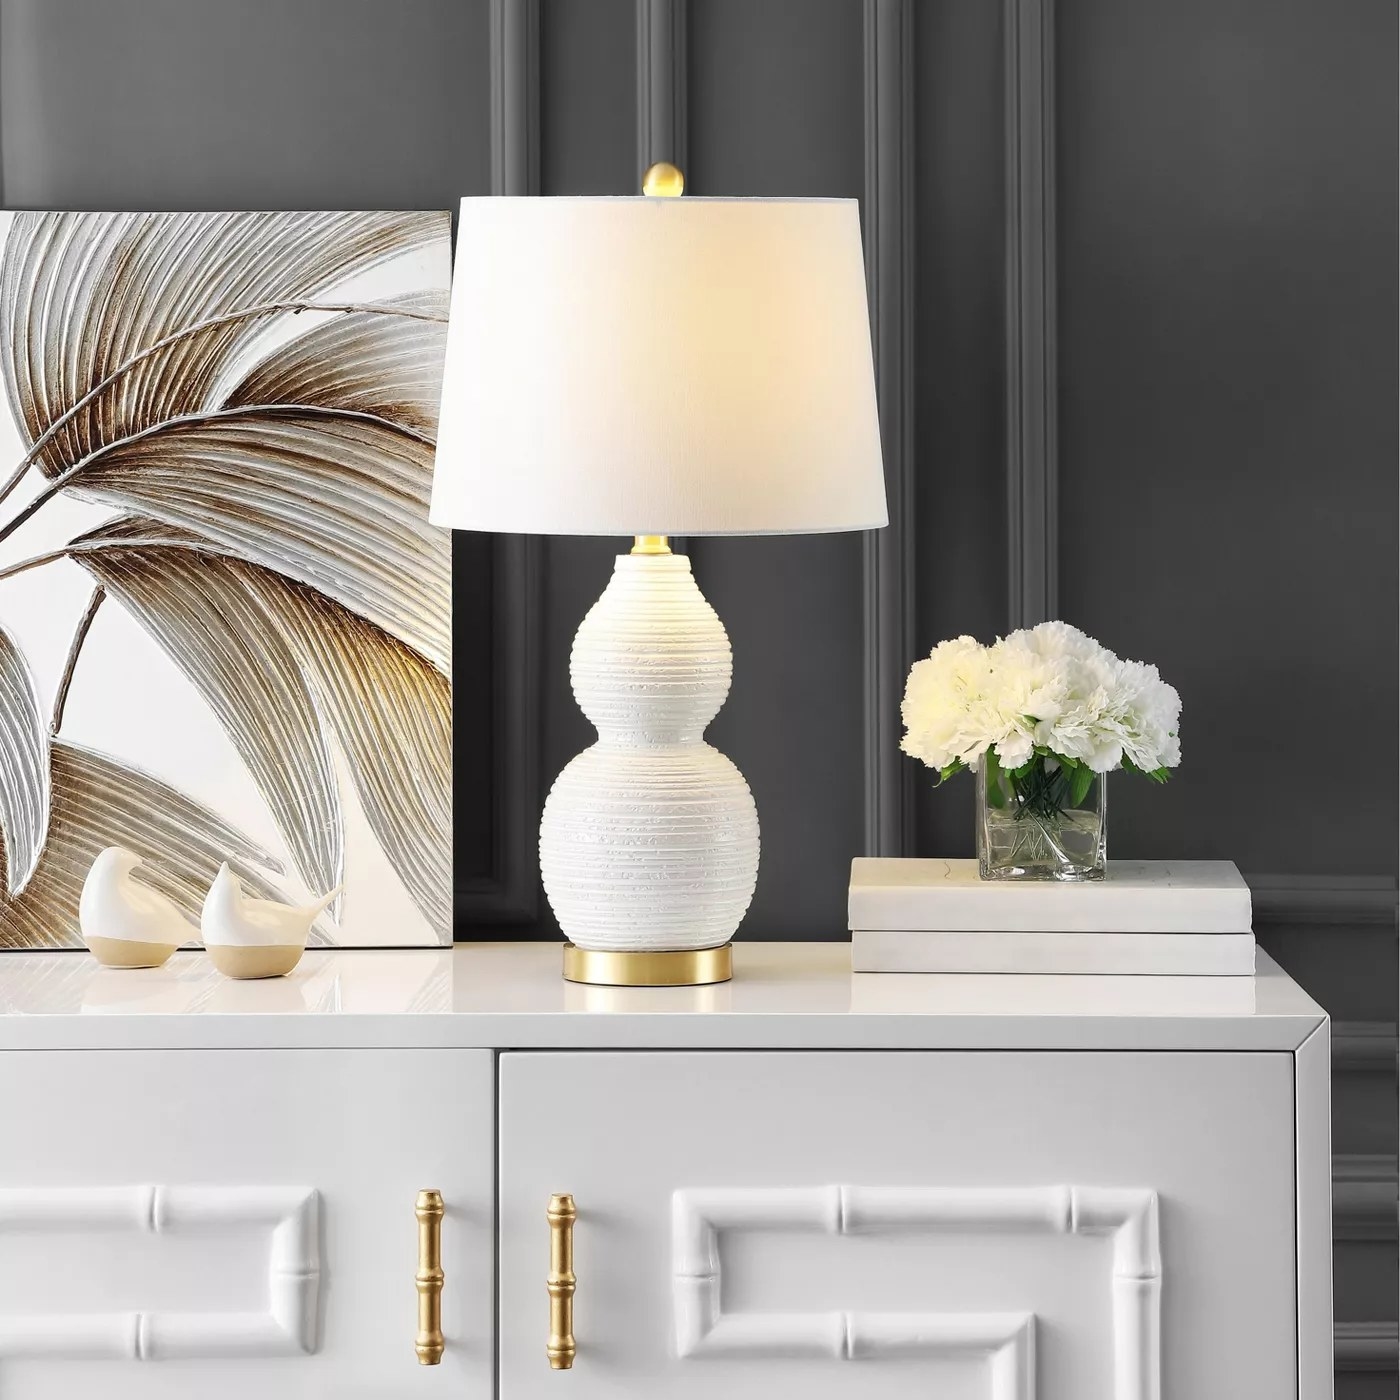 The white table lamp with gold accents